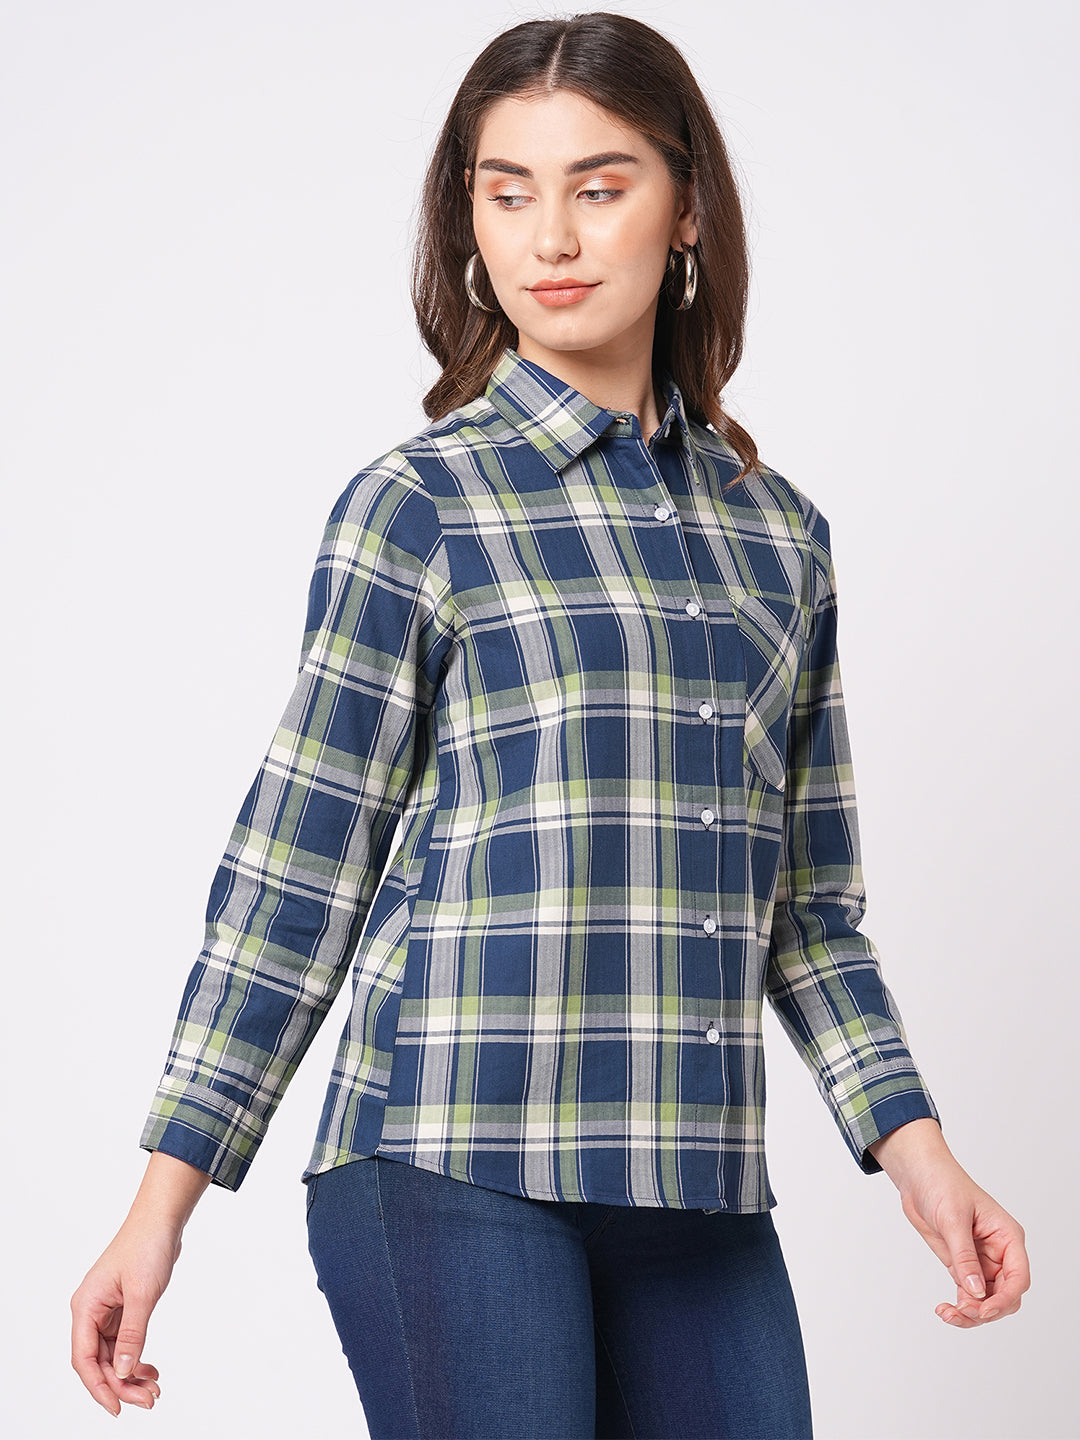 Bombay High Women's Dark Blue Chequered Relaxed Fit Full Sleeves Shirt